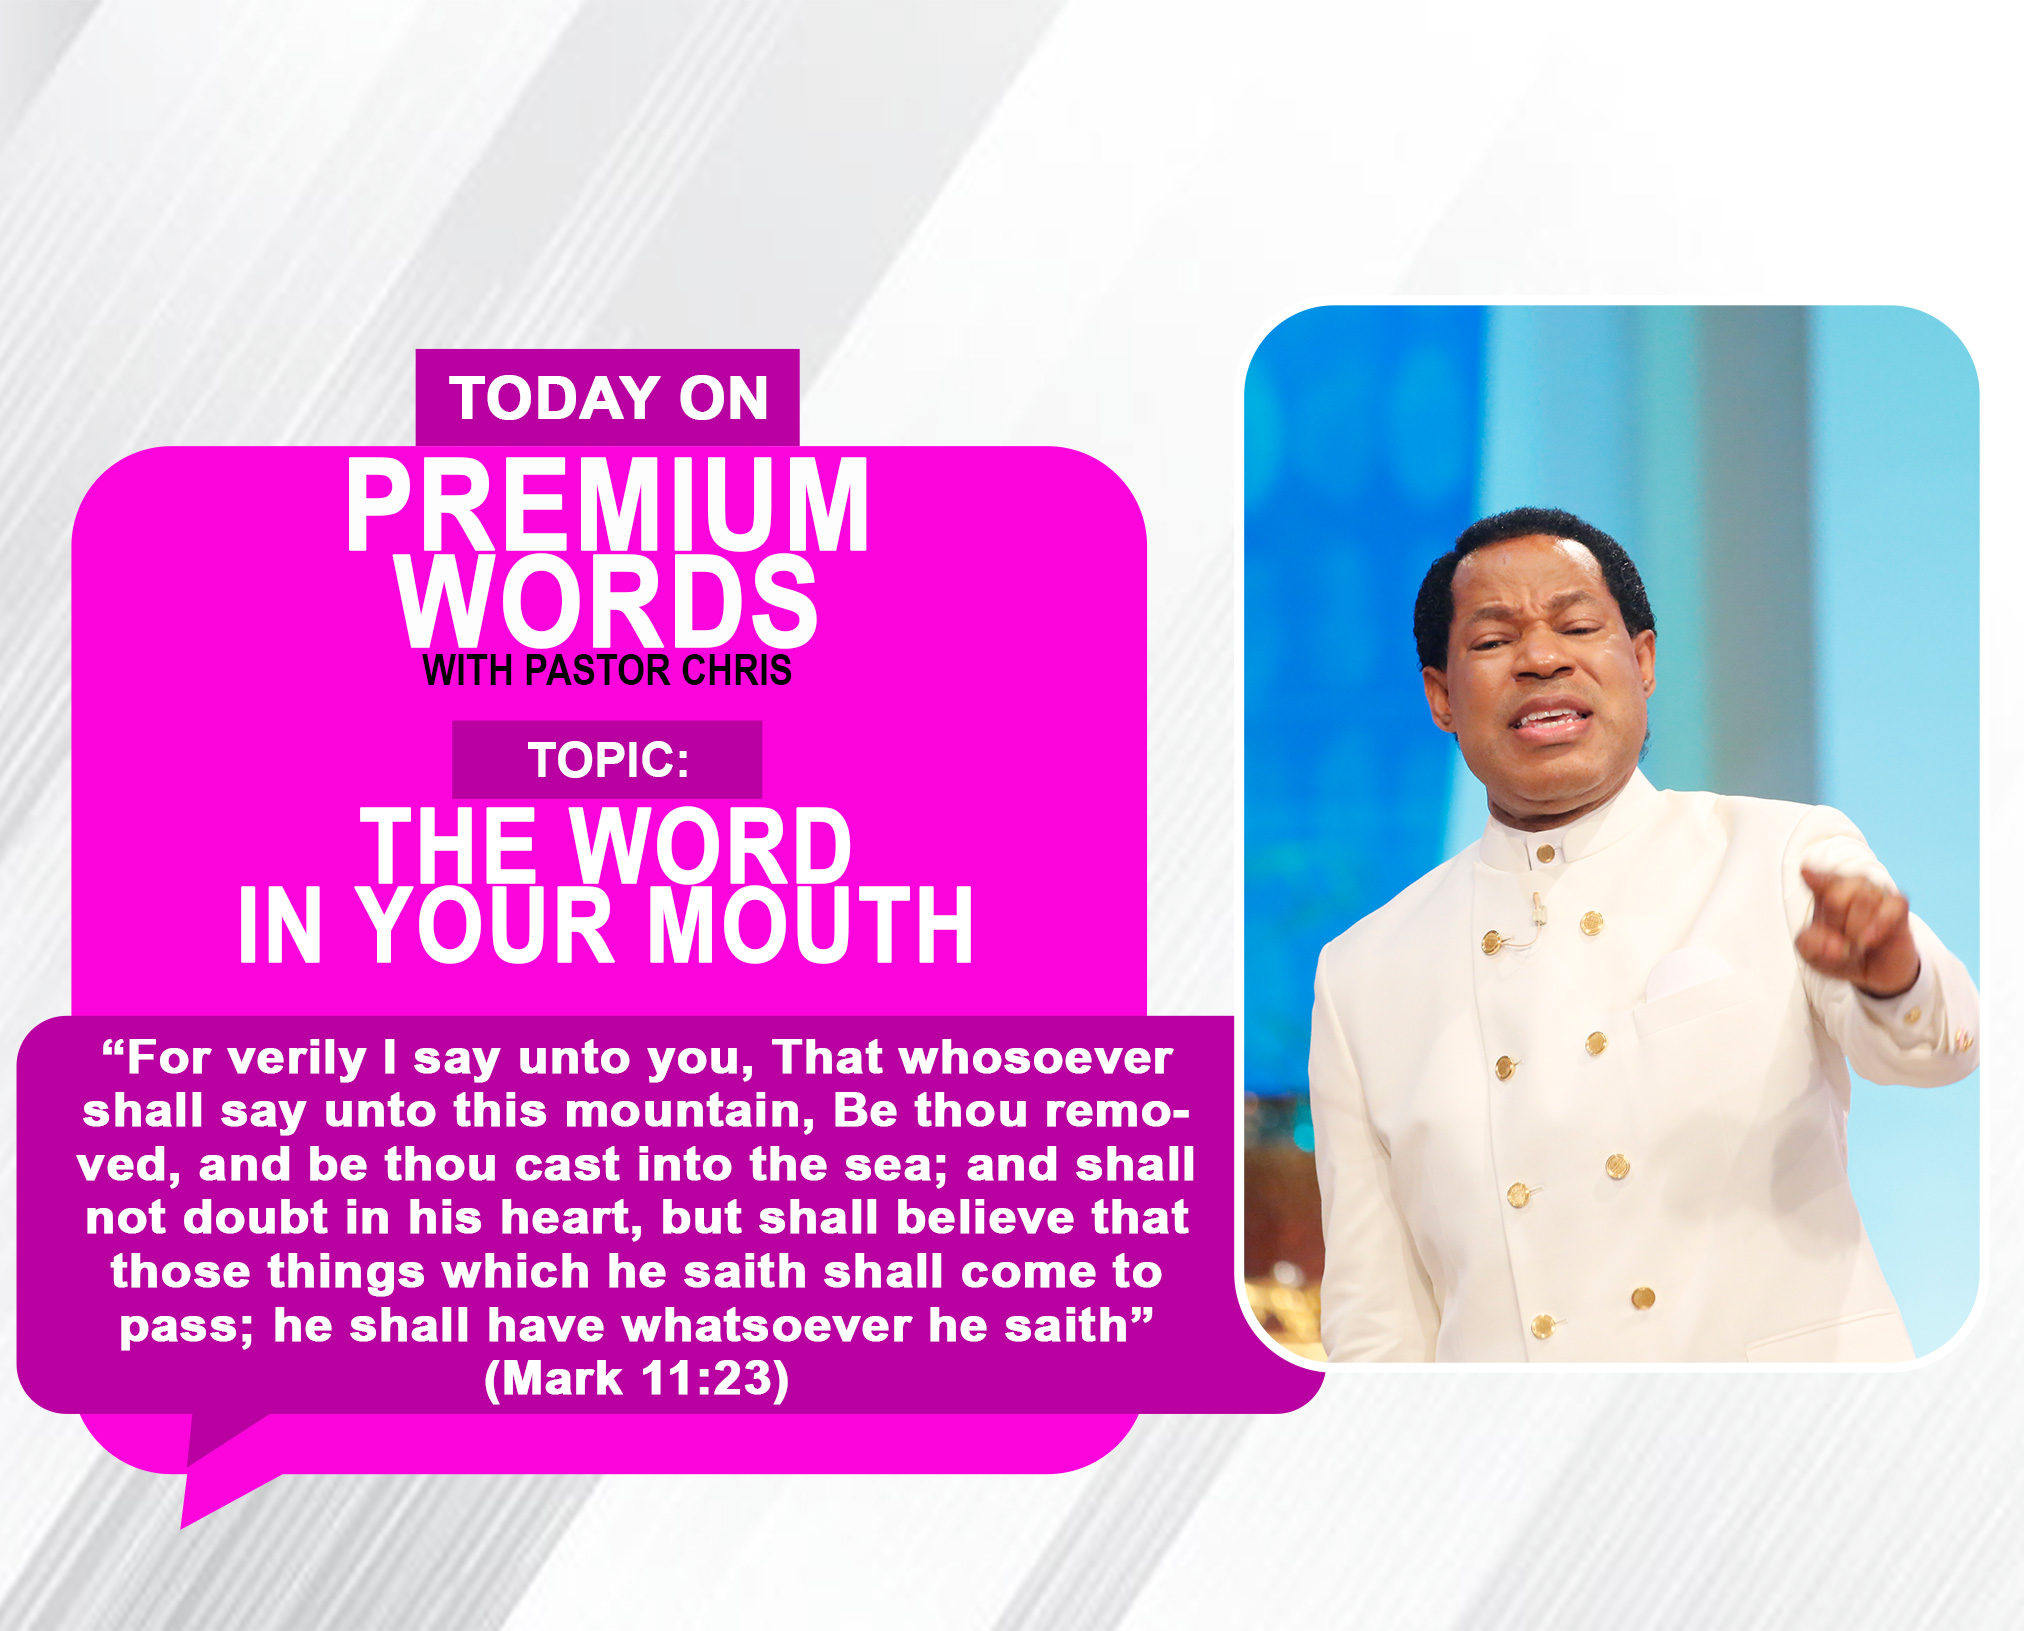 THE WORD IN YOUR MOUTH